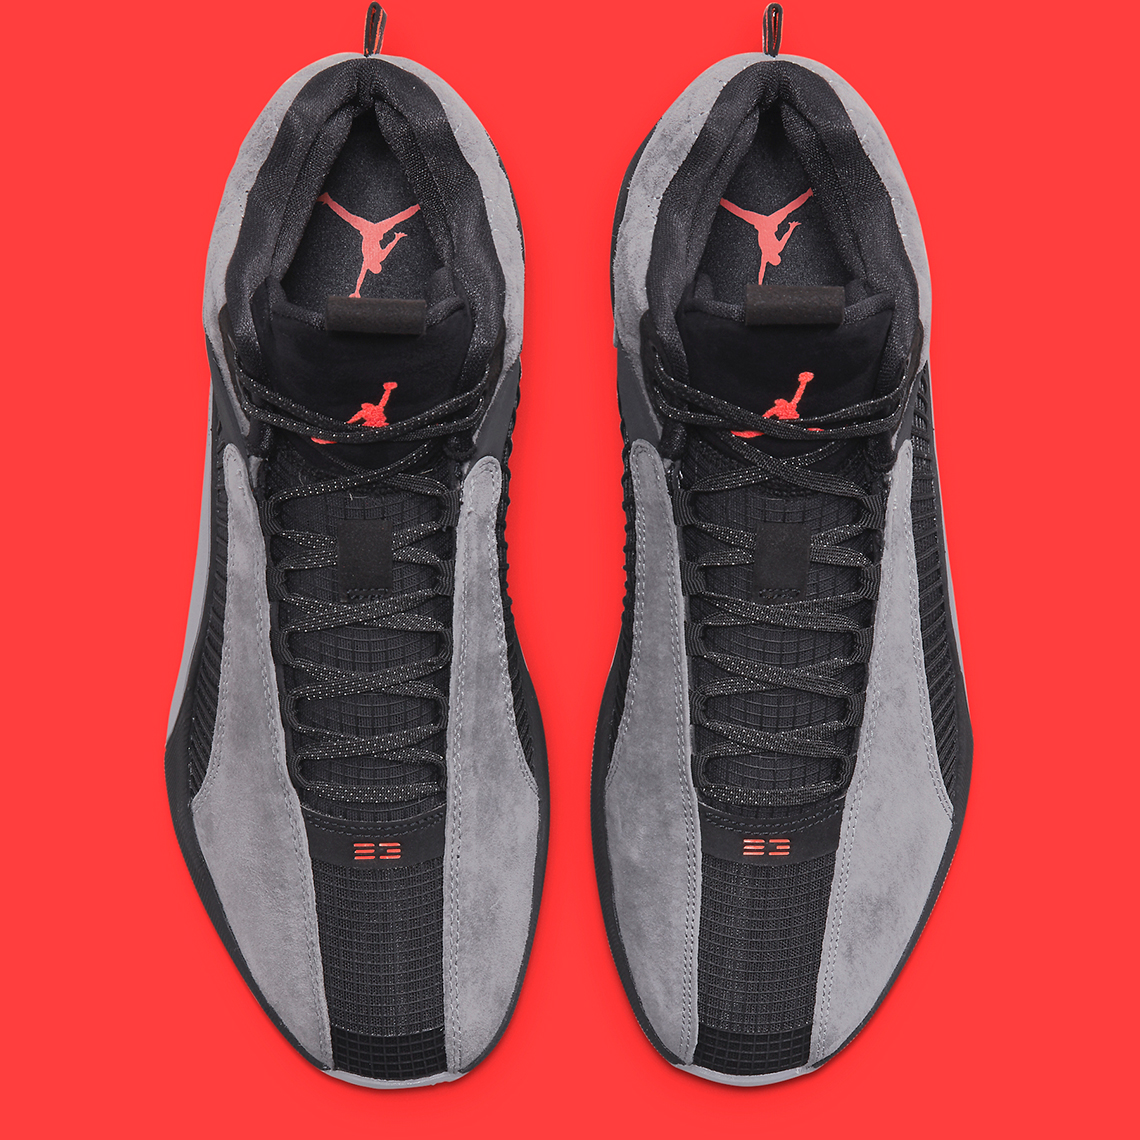 Air Jordan 35 Smoke Greylimited Special Sales And Special Offers Women S Men S Sneakers Sports Shoes Shop Athletic Shoes Online Off 72 Free Shipping Fast Shippment